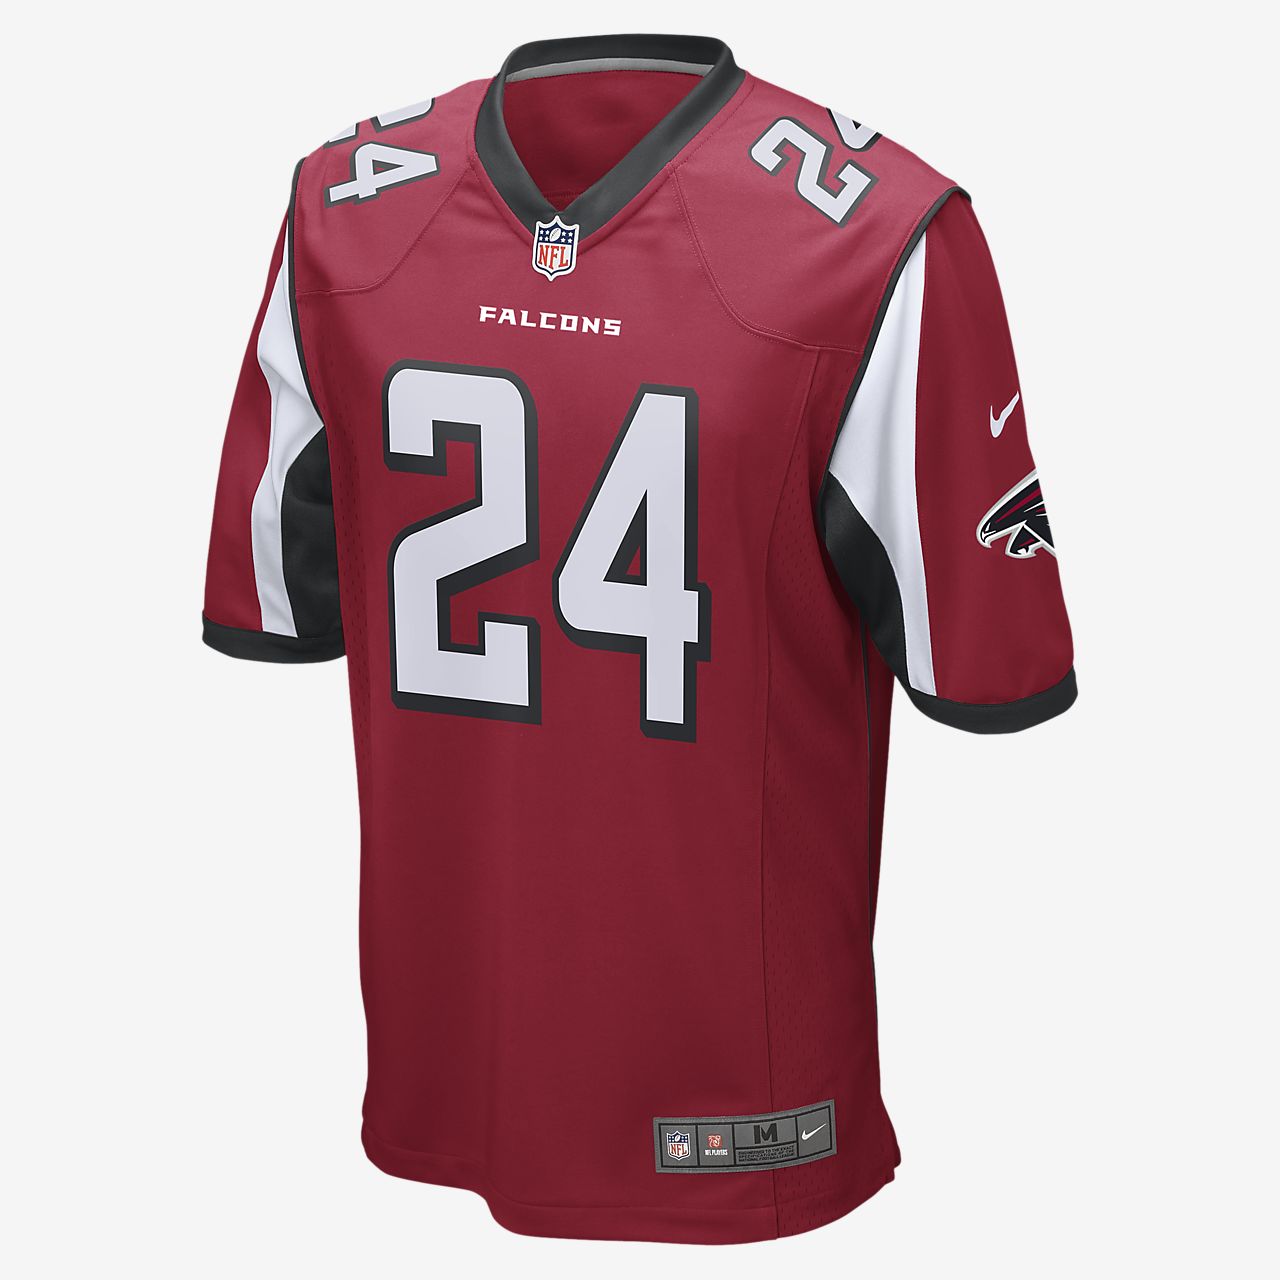 falcons jersey schedule